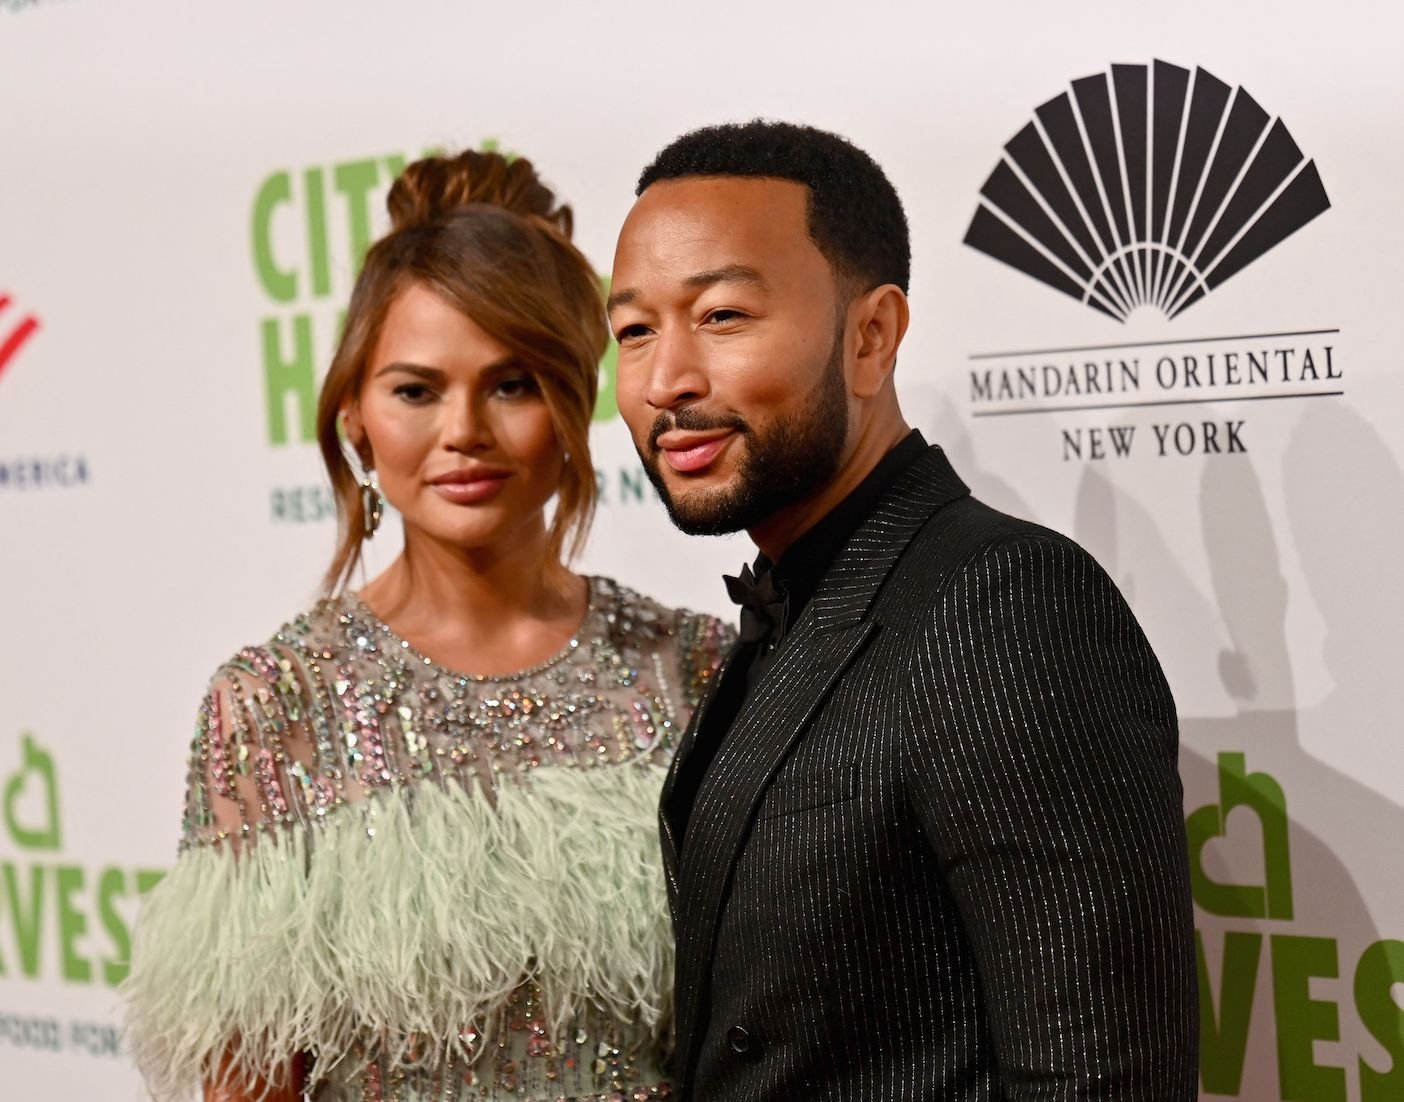 Tabloid Story: Chrissy Teigen and John Legend Supposedly Flew Hollywood After Last Year’s Bullying Scandal